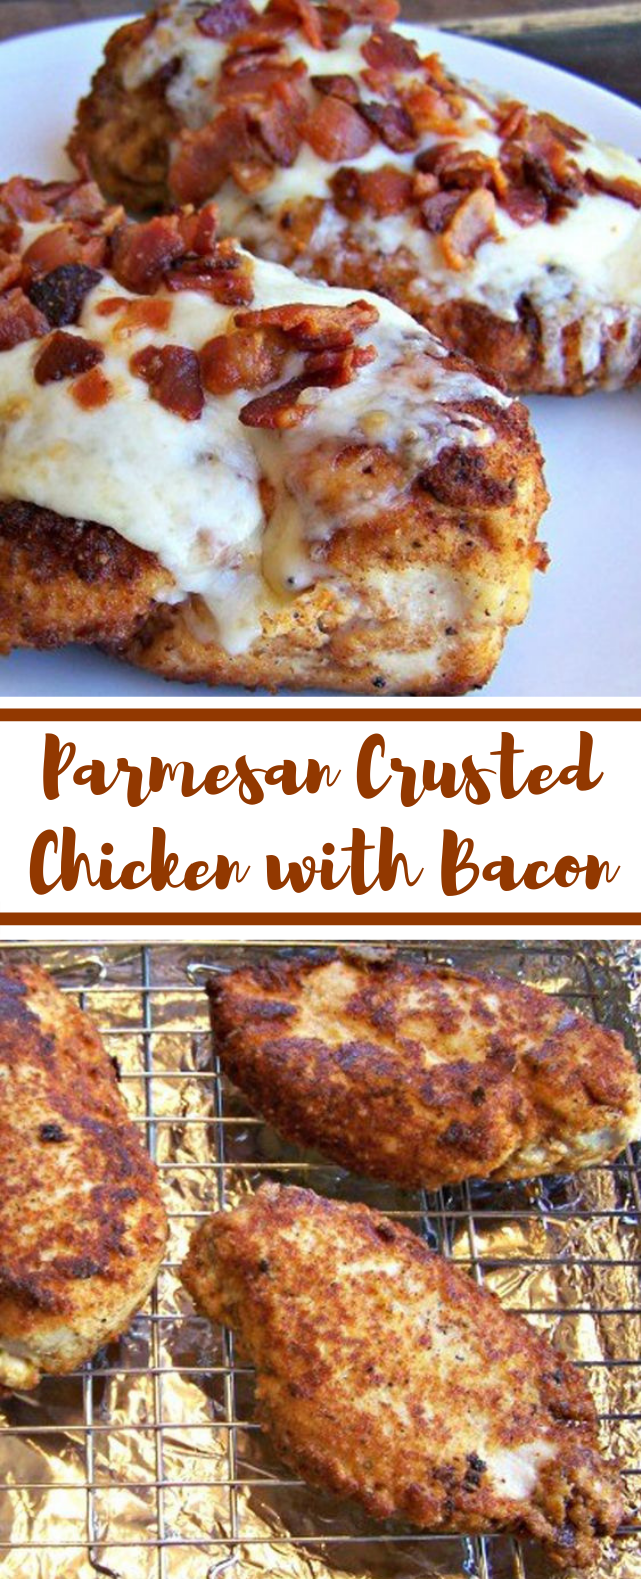 Parmesan Crusted Chicken with Bacon #Ketodiet #HealthyRecipe